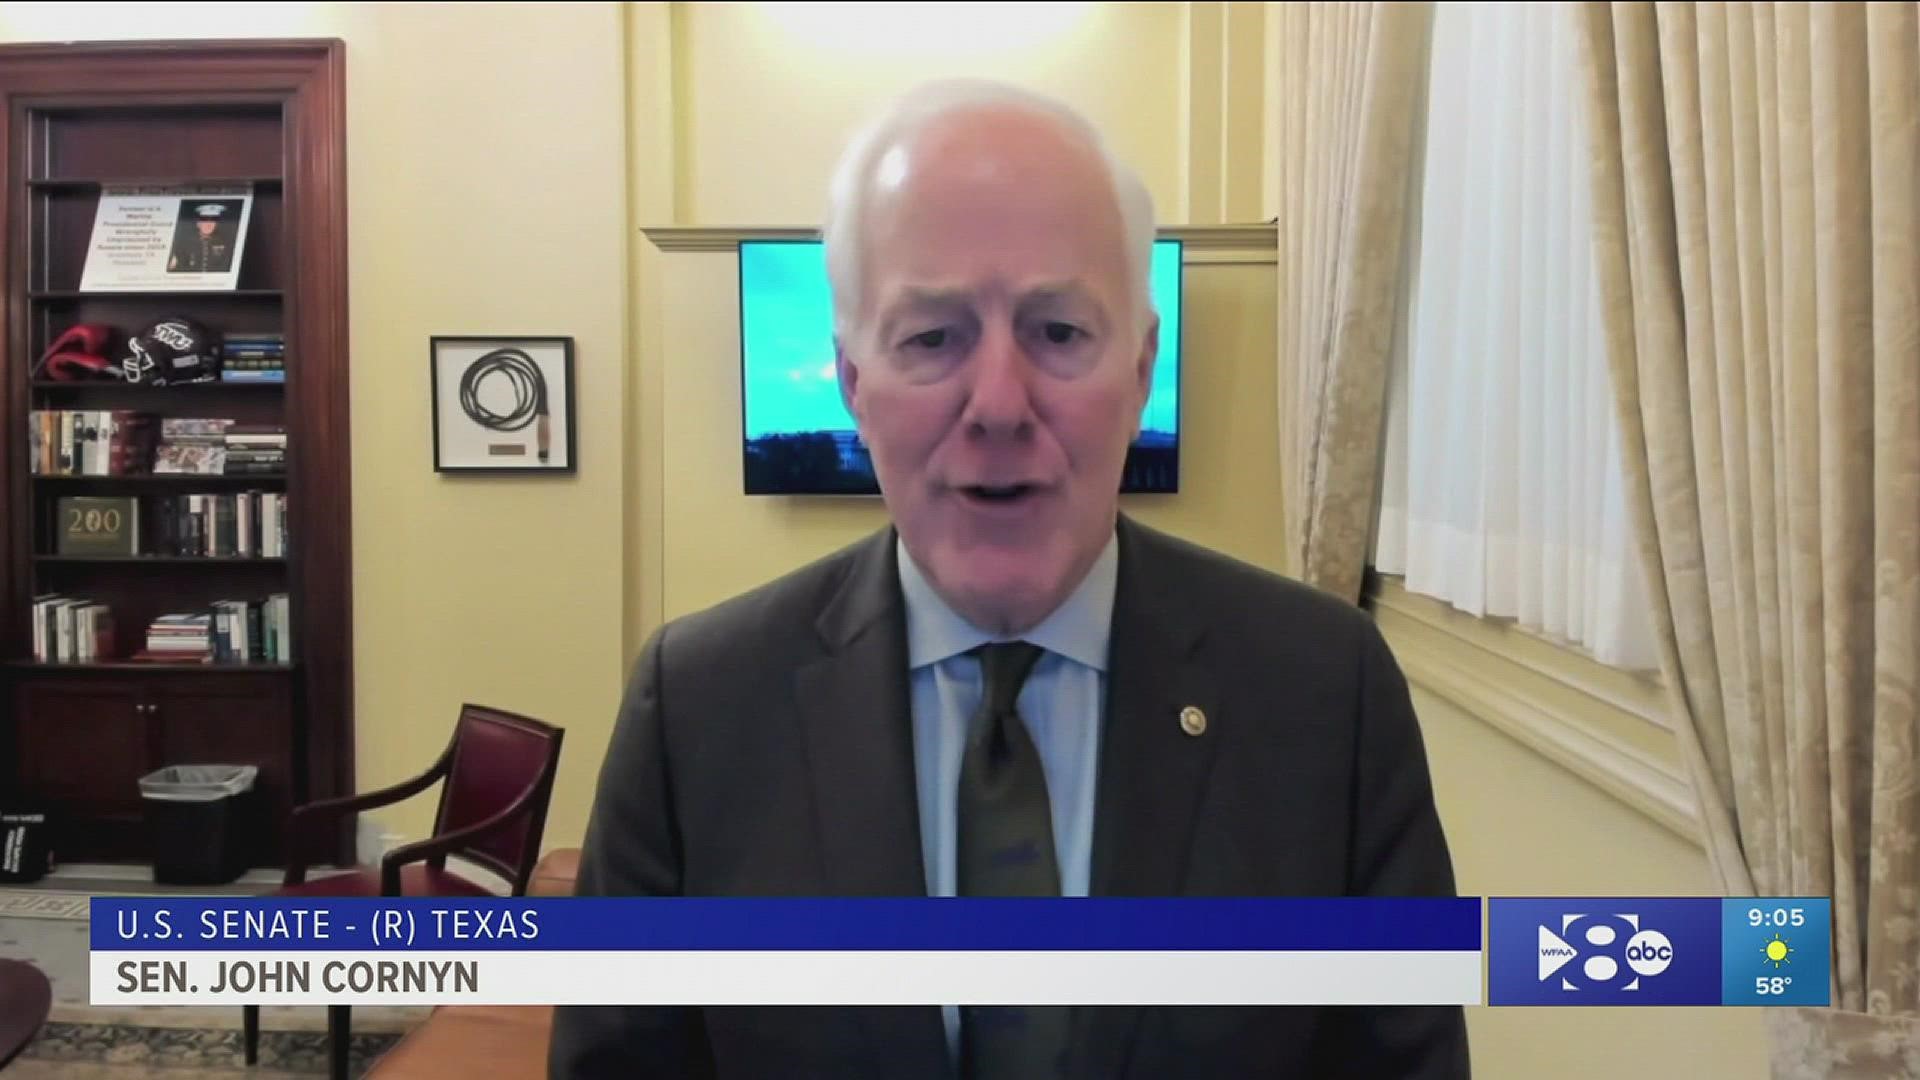 Sen. John Cornyn says he is a solid “no” when the Senate Judiciary Committee votes on the SCOTUS nomination on Monday, April 4.